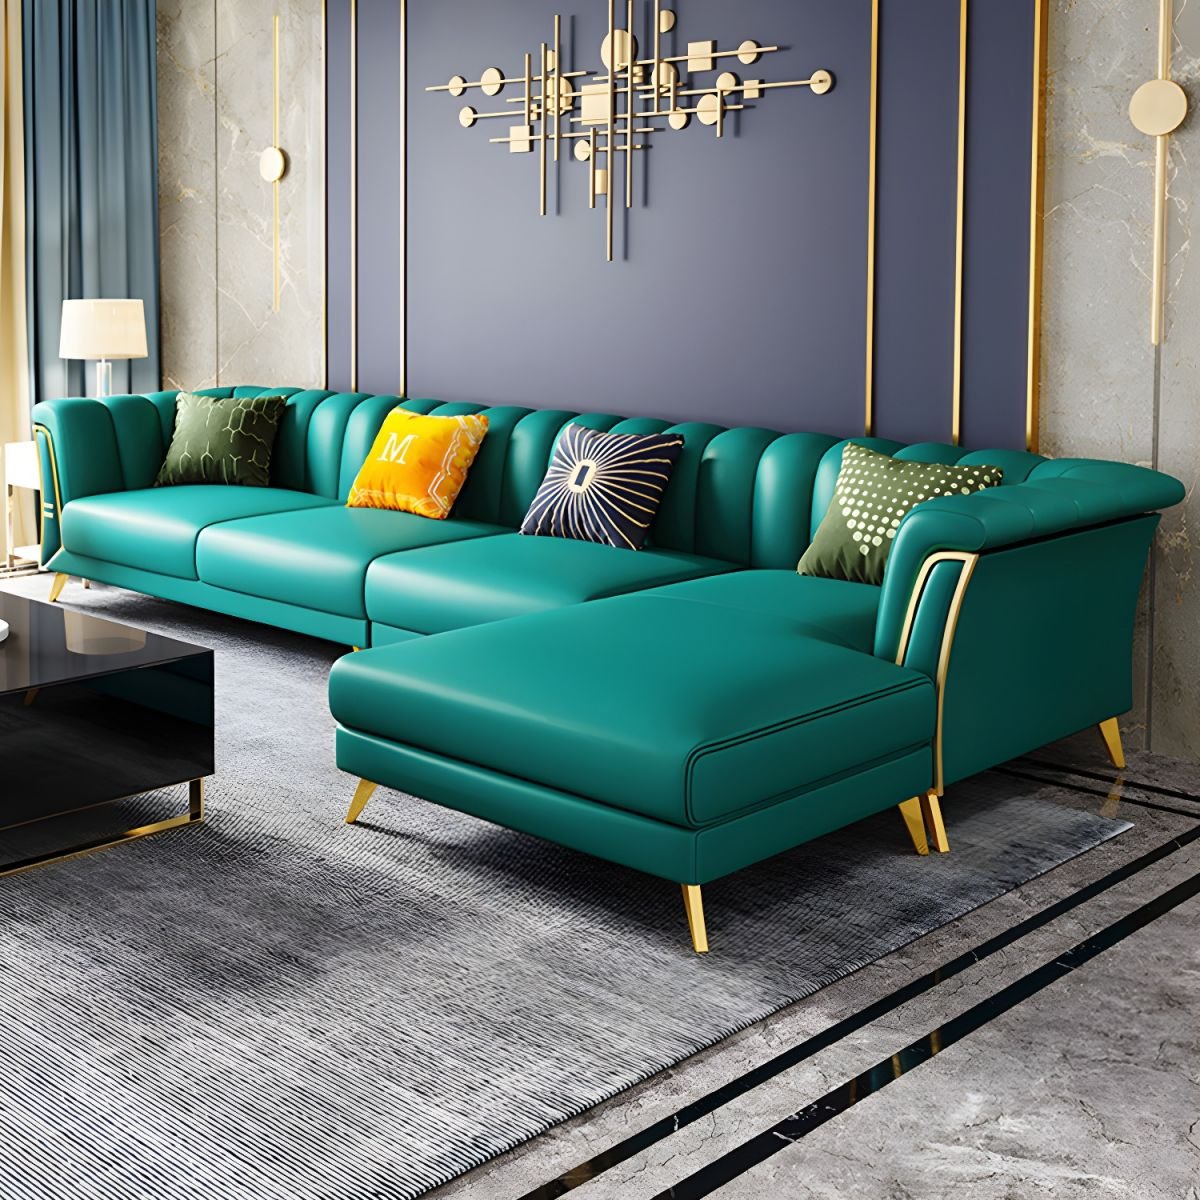 Glam Style Nappa Sectional Sofa with Brass Legs and Channel Back Design - 134"L x 71"W x 31"H Nappa Right